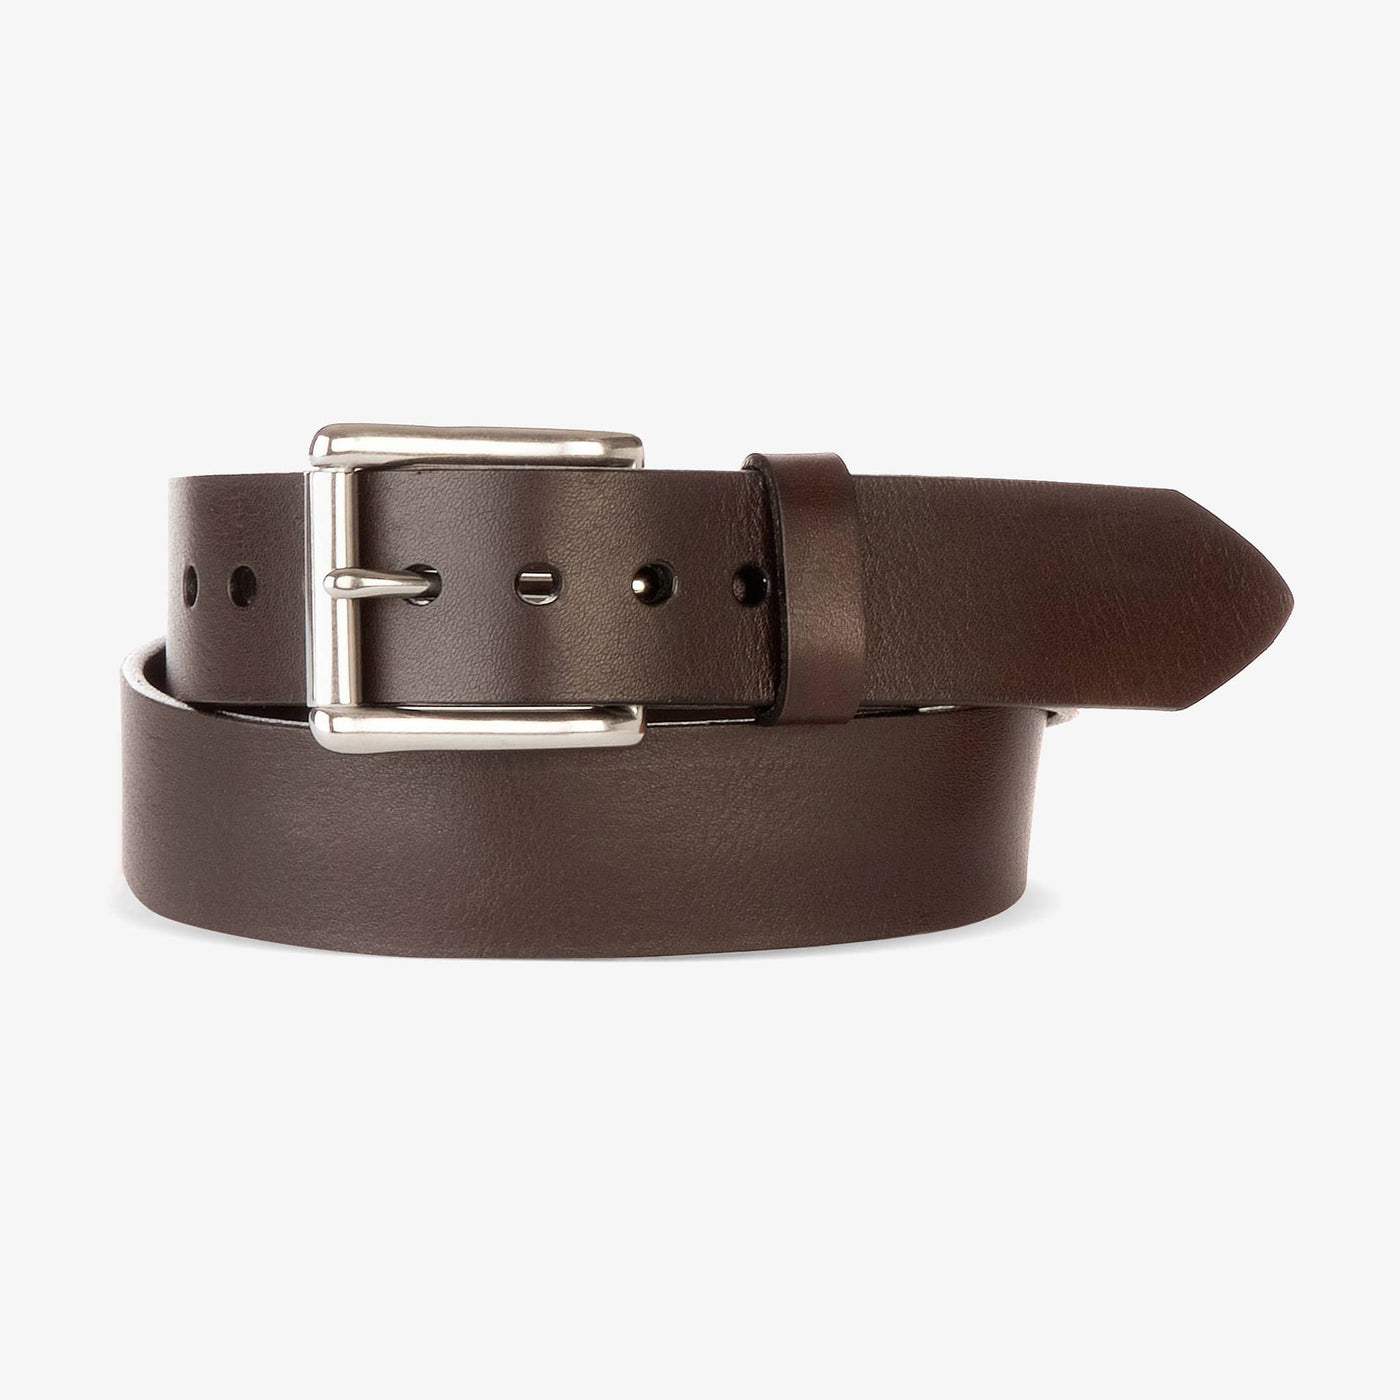 Fine Leather Men's Dress Belt Handcrafted from Bridle Leather